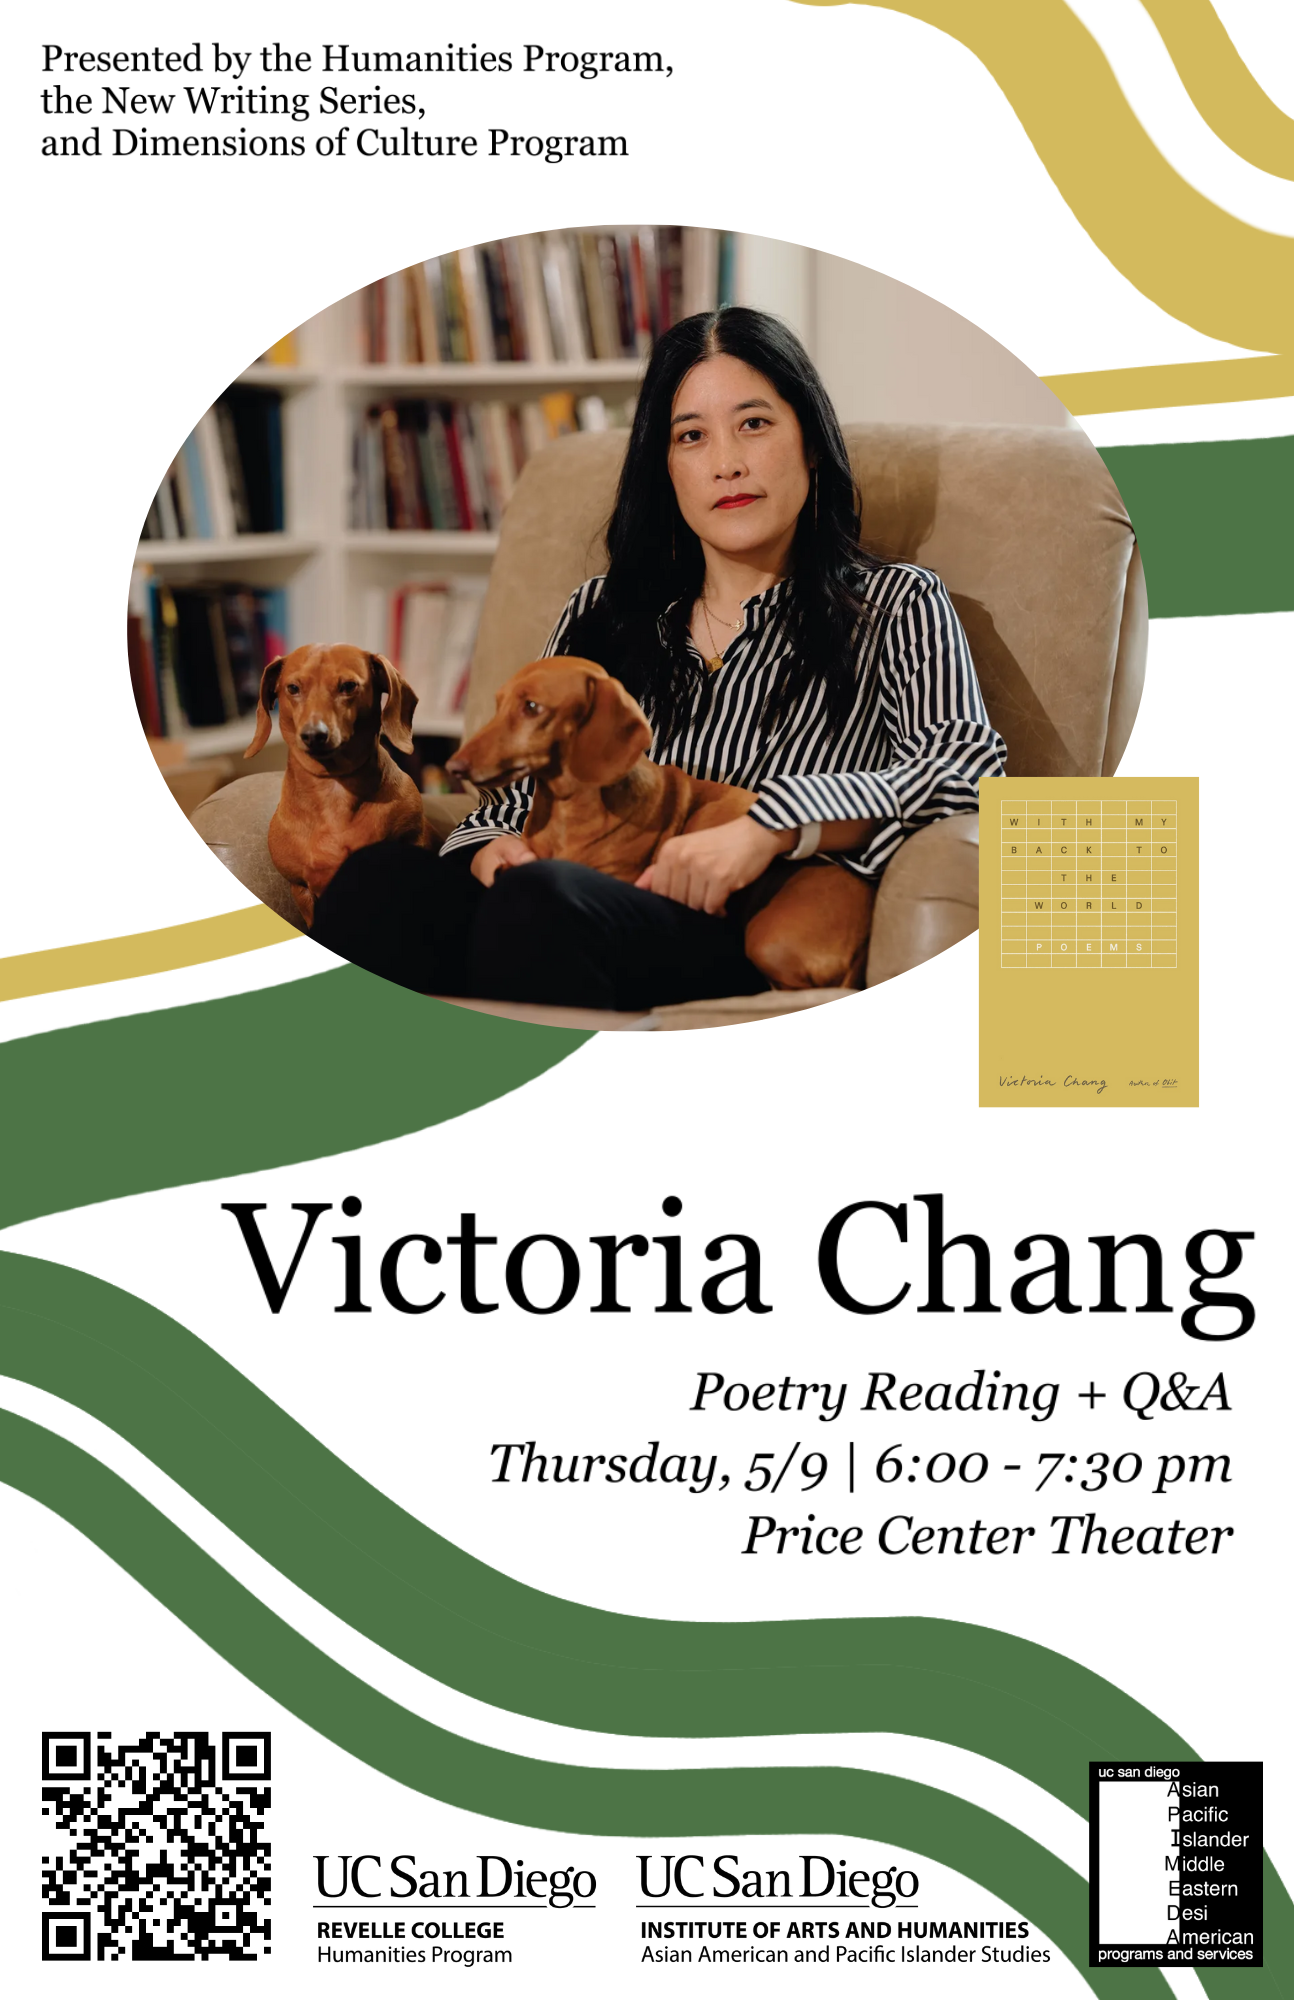 Victoria Chang poetry reading